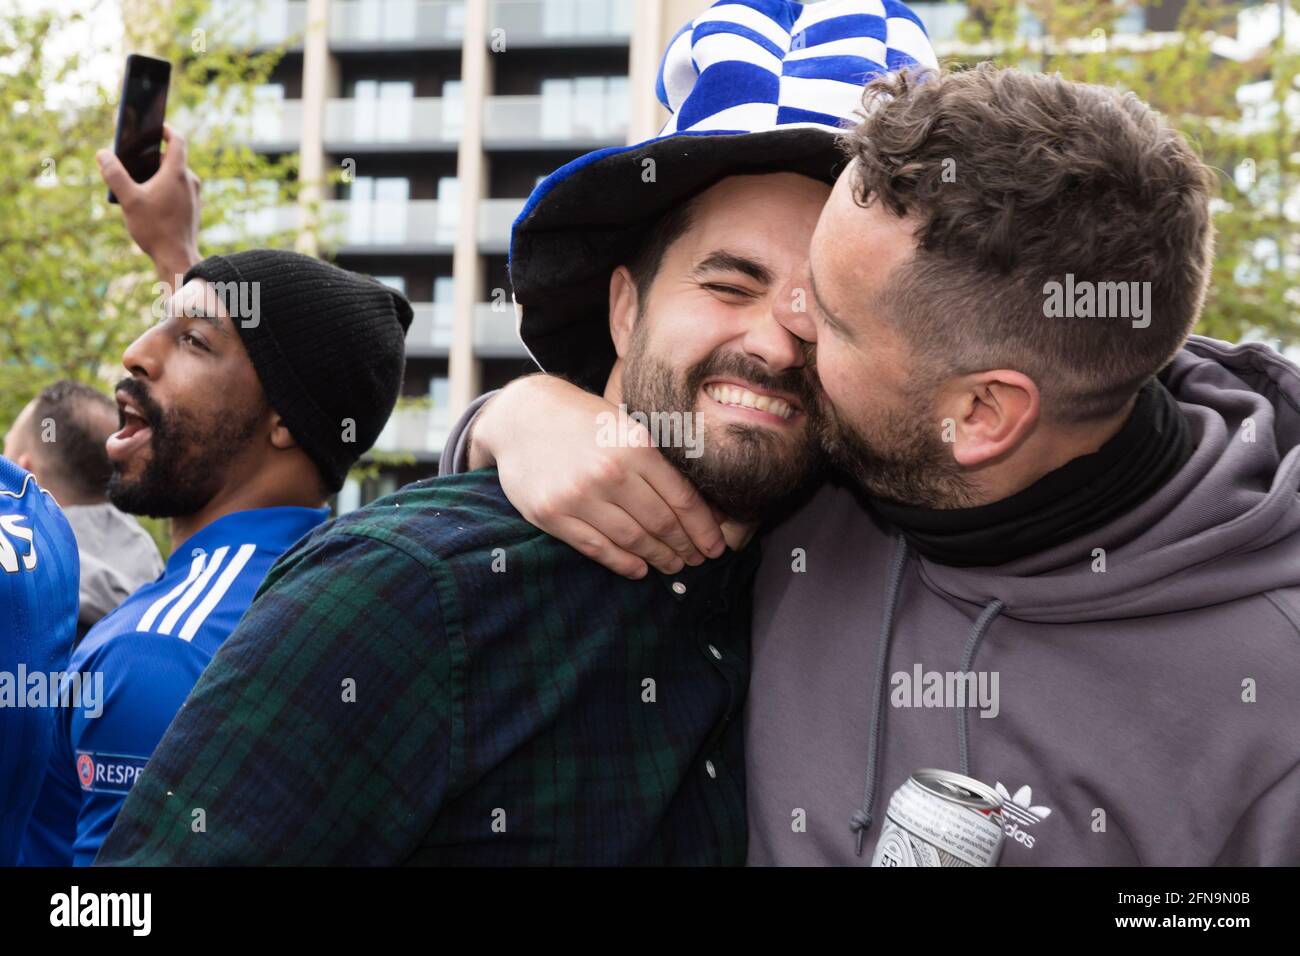 Wembley Stadium, Wembley Park, UK. 15th May, 2021. Leicester City supporters having fun pre match at Wembley ahead of the FA Cup Final 2021 against Chelsea at Wembley Stadium. Credit: amanda rose/Alamy Live News Stock Photo